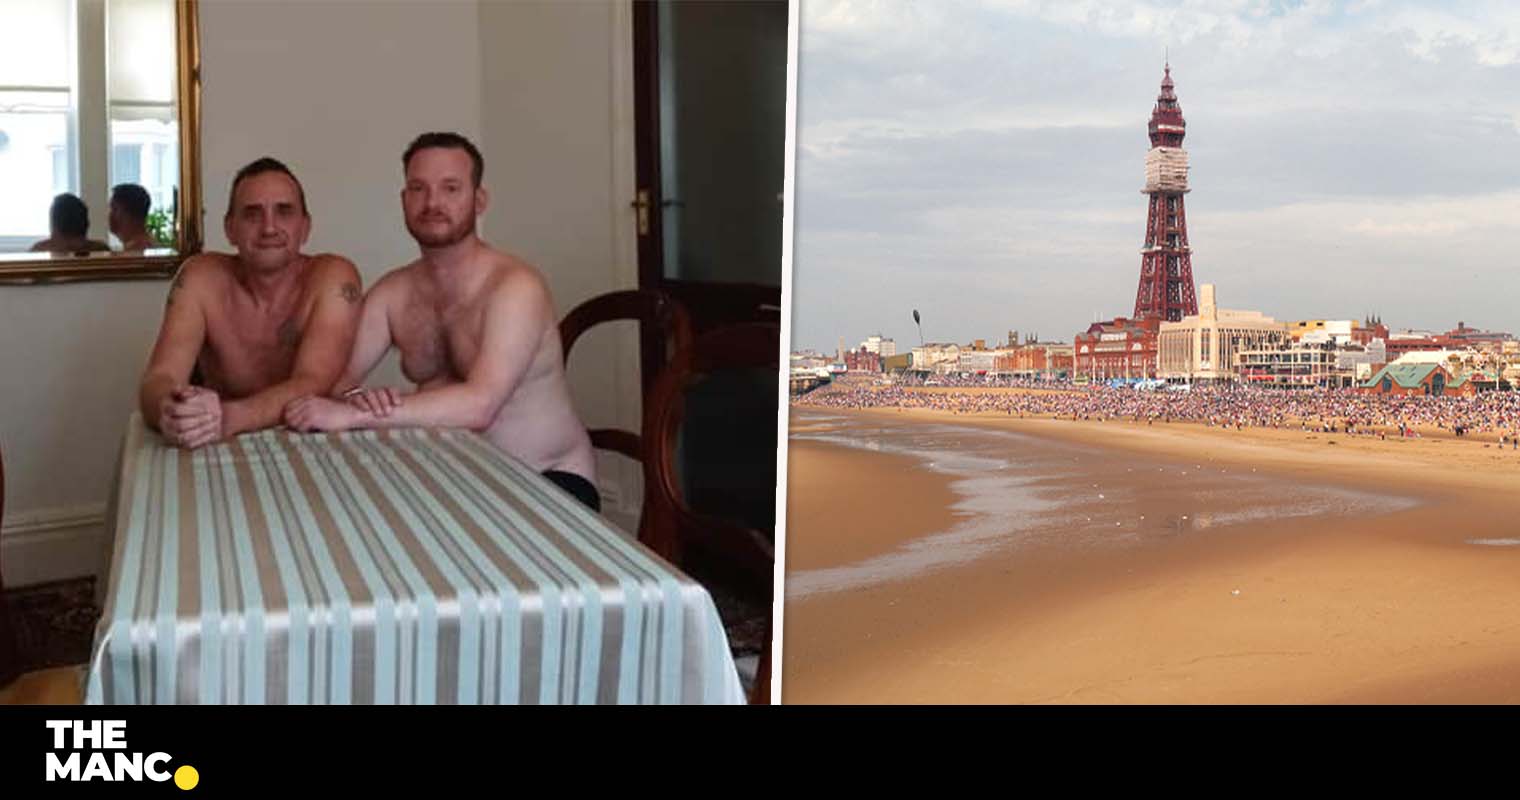 Gay naturist hotel Welhorneys could be opening in Blackpool pic